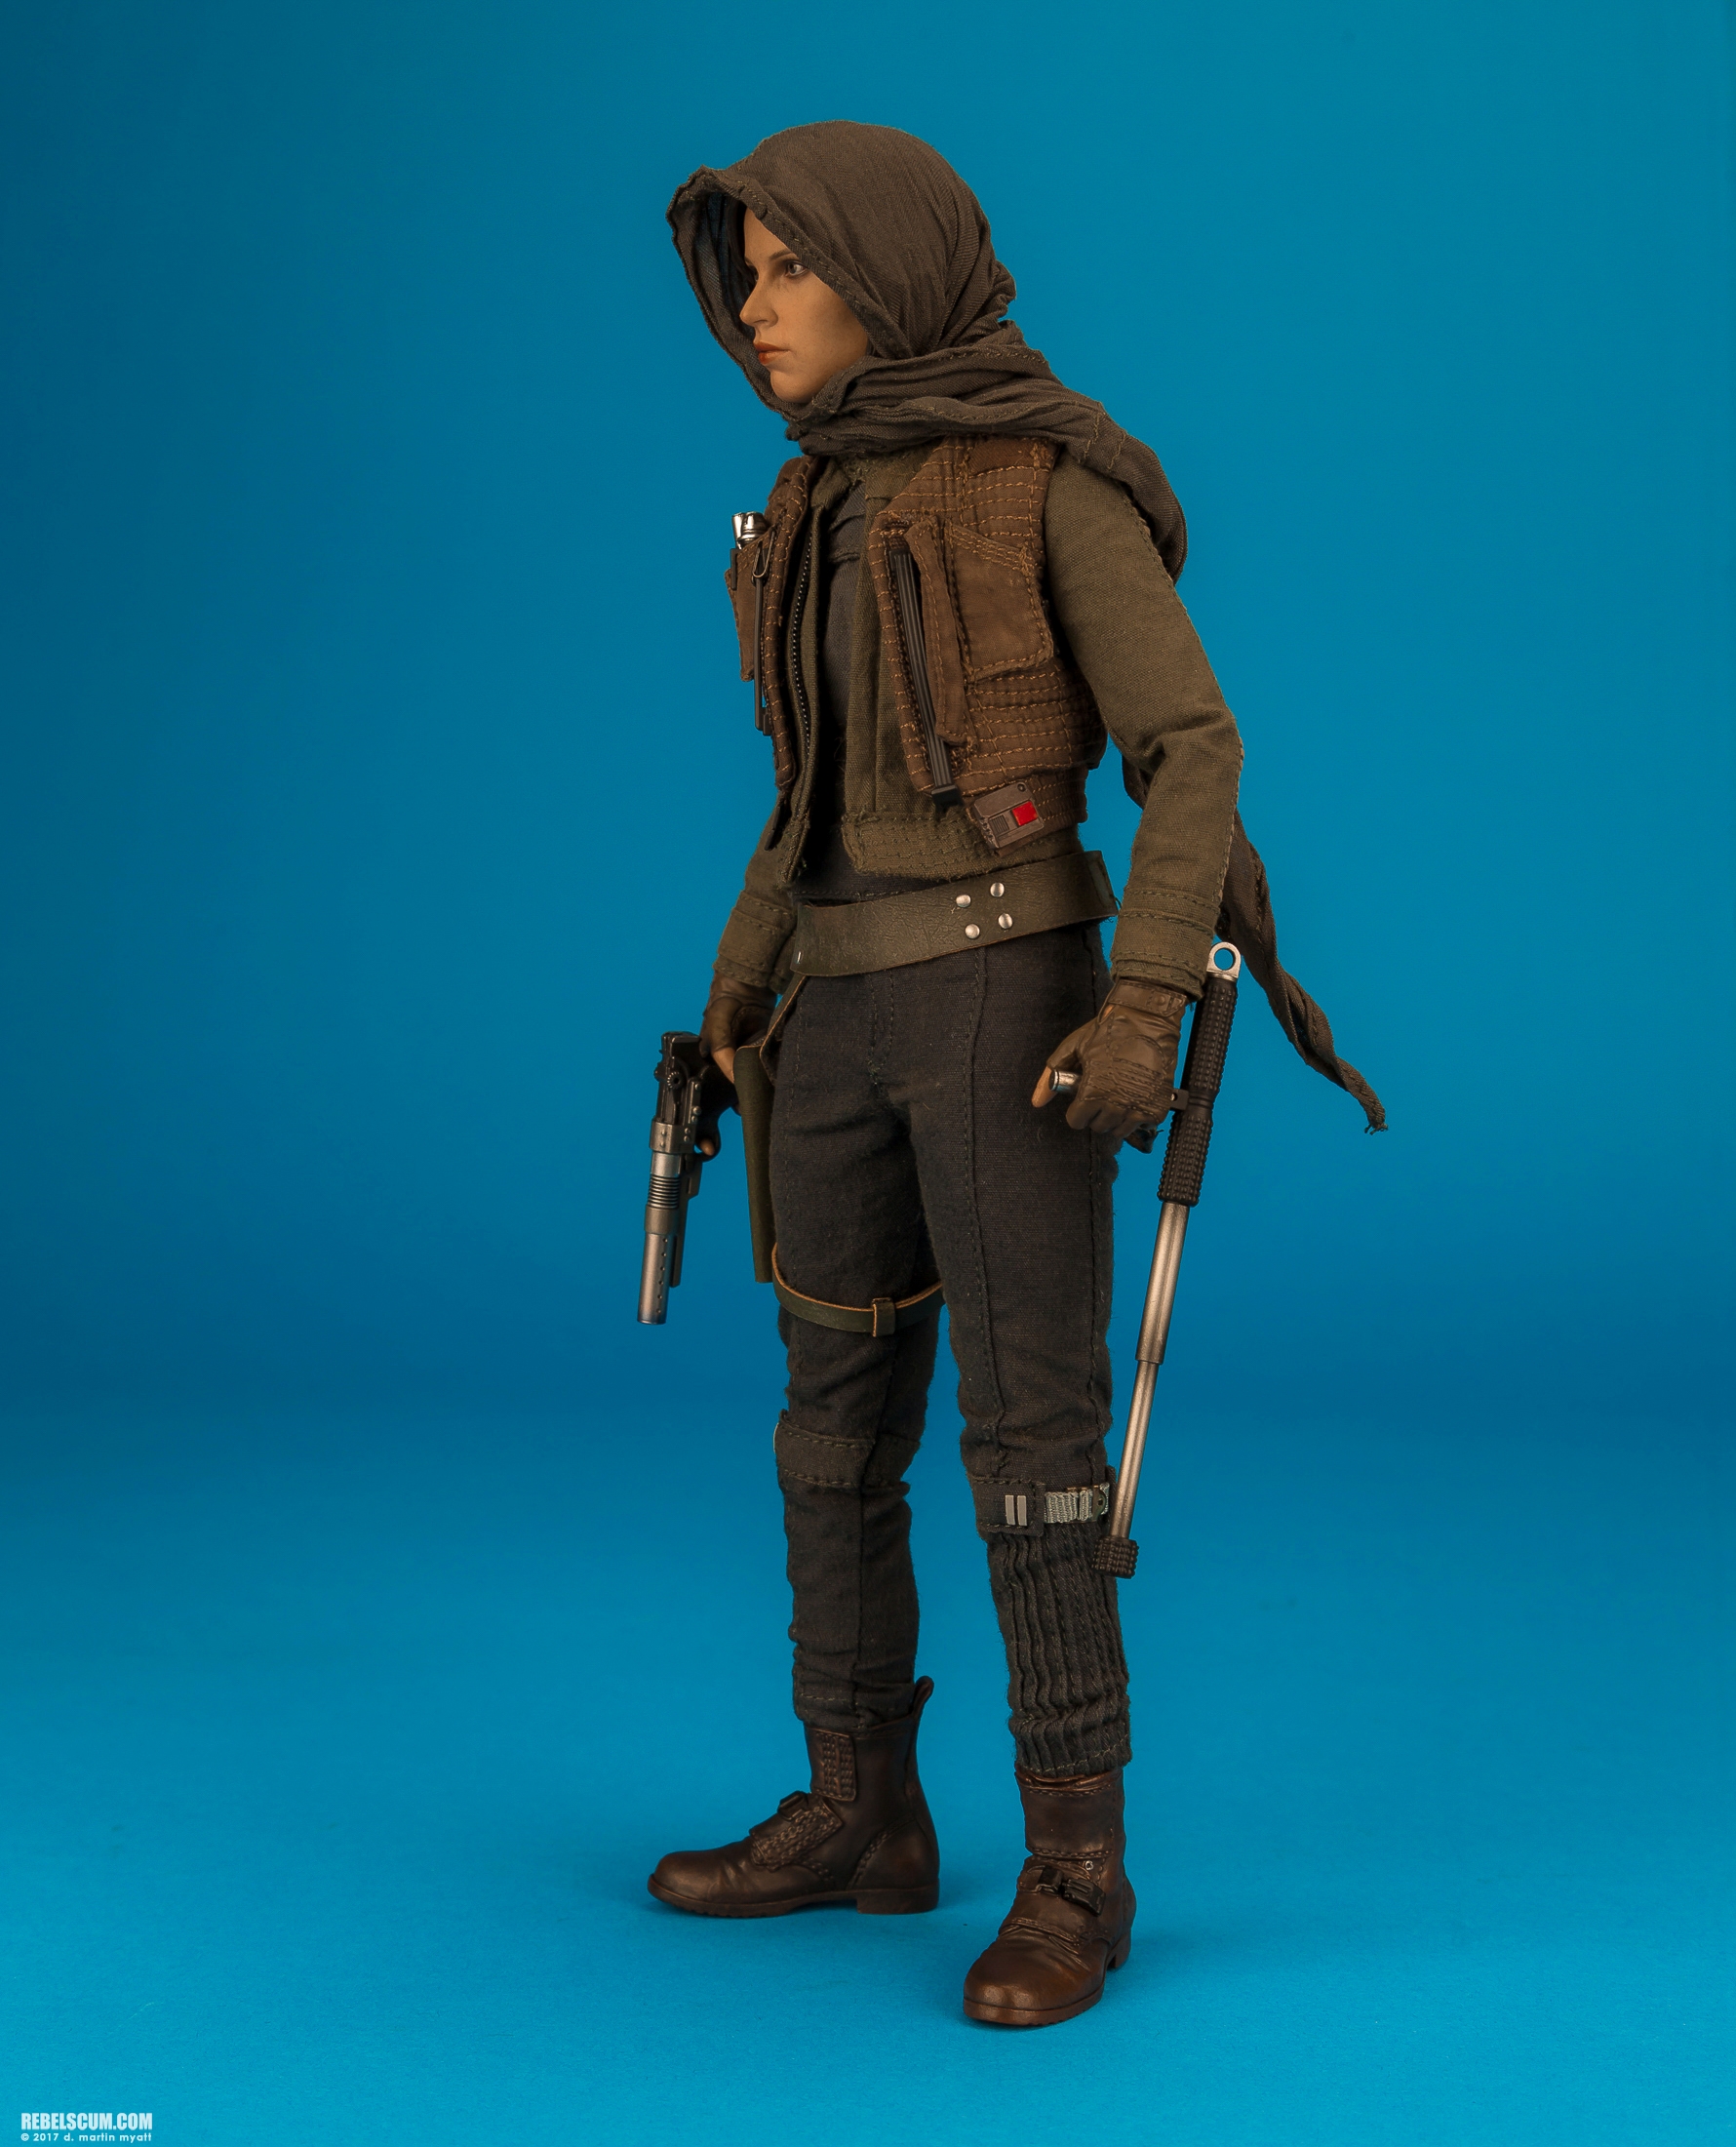 MMS405-Jyn-Erso-Deluxe-Star-Wars-Rogue-One-Hot-Toys-011.jpg